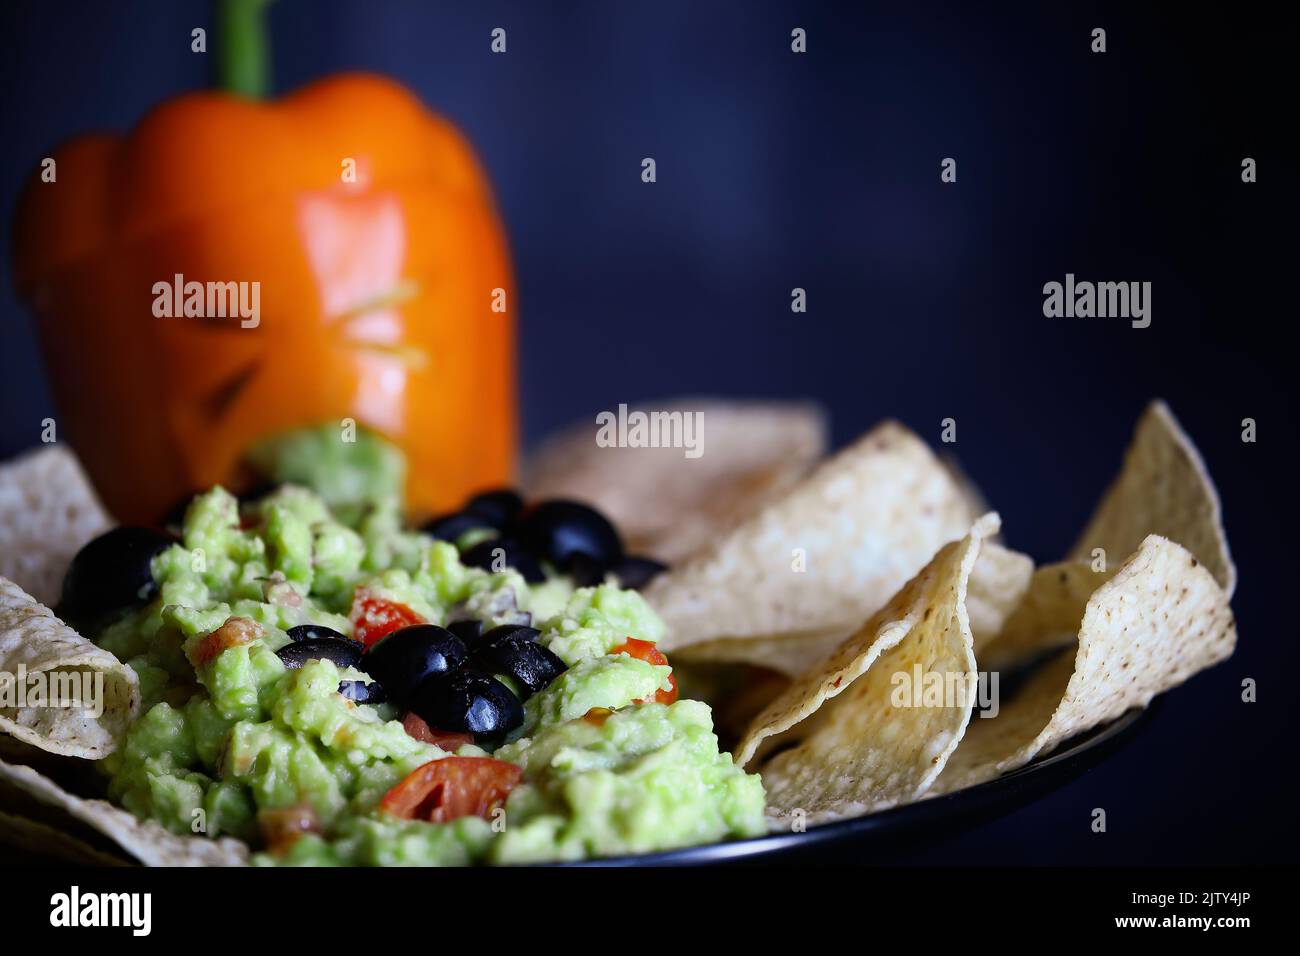 Black olive spiders crawling on guacamole with chips. Selective focus on bug with blurred foreground and background. Pepper as monster with cut out fa Stock Photo